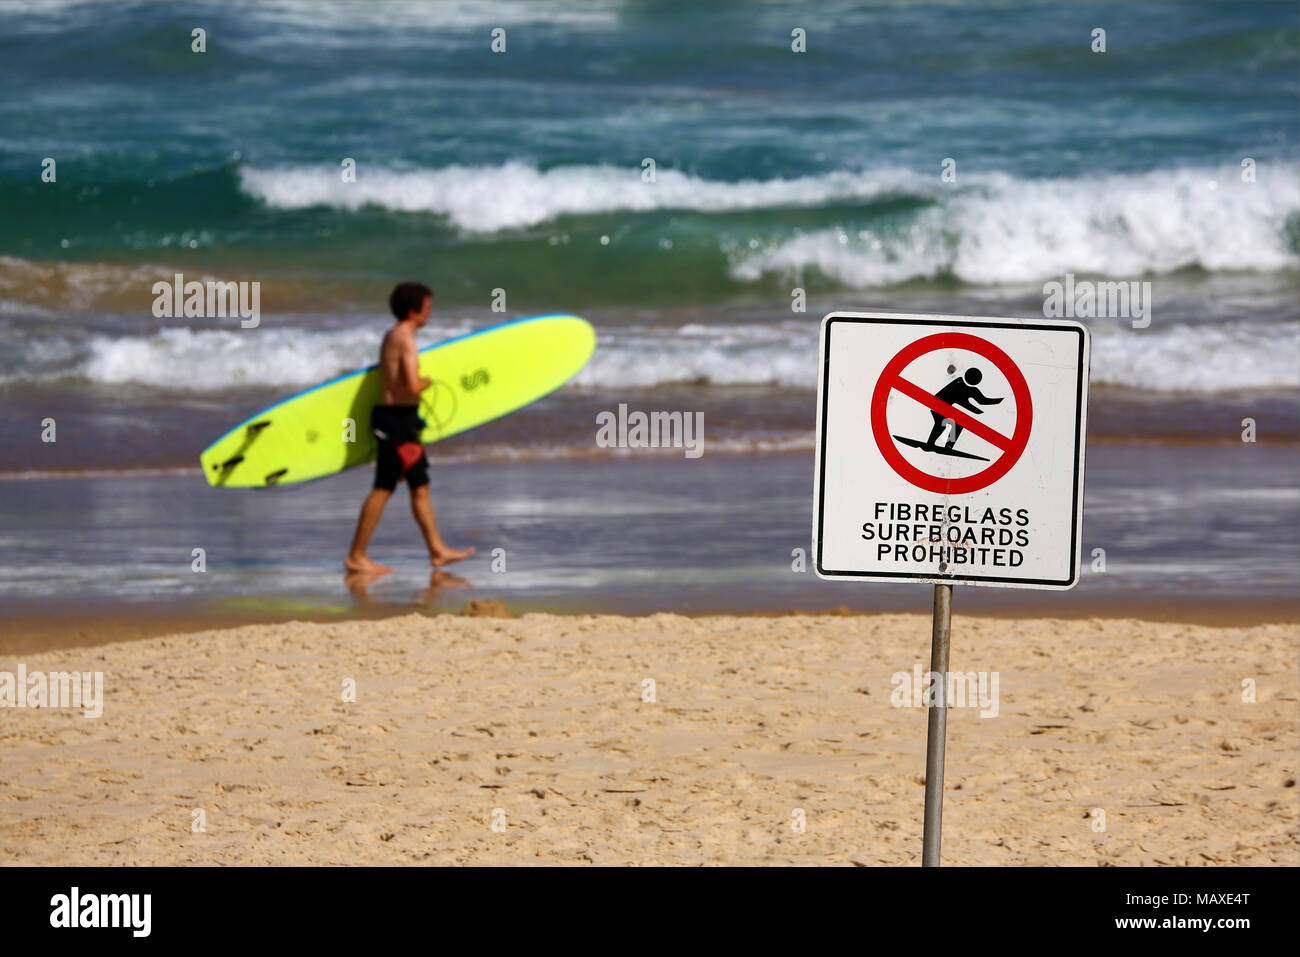 Surfer with surfboard and no fibreglass surfboards sign on Bondi Beach, Sydney, New South Wales, Australia Stock Photo